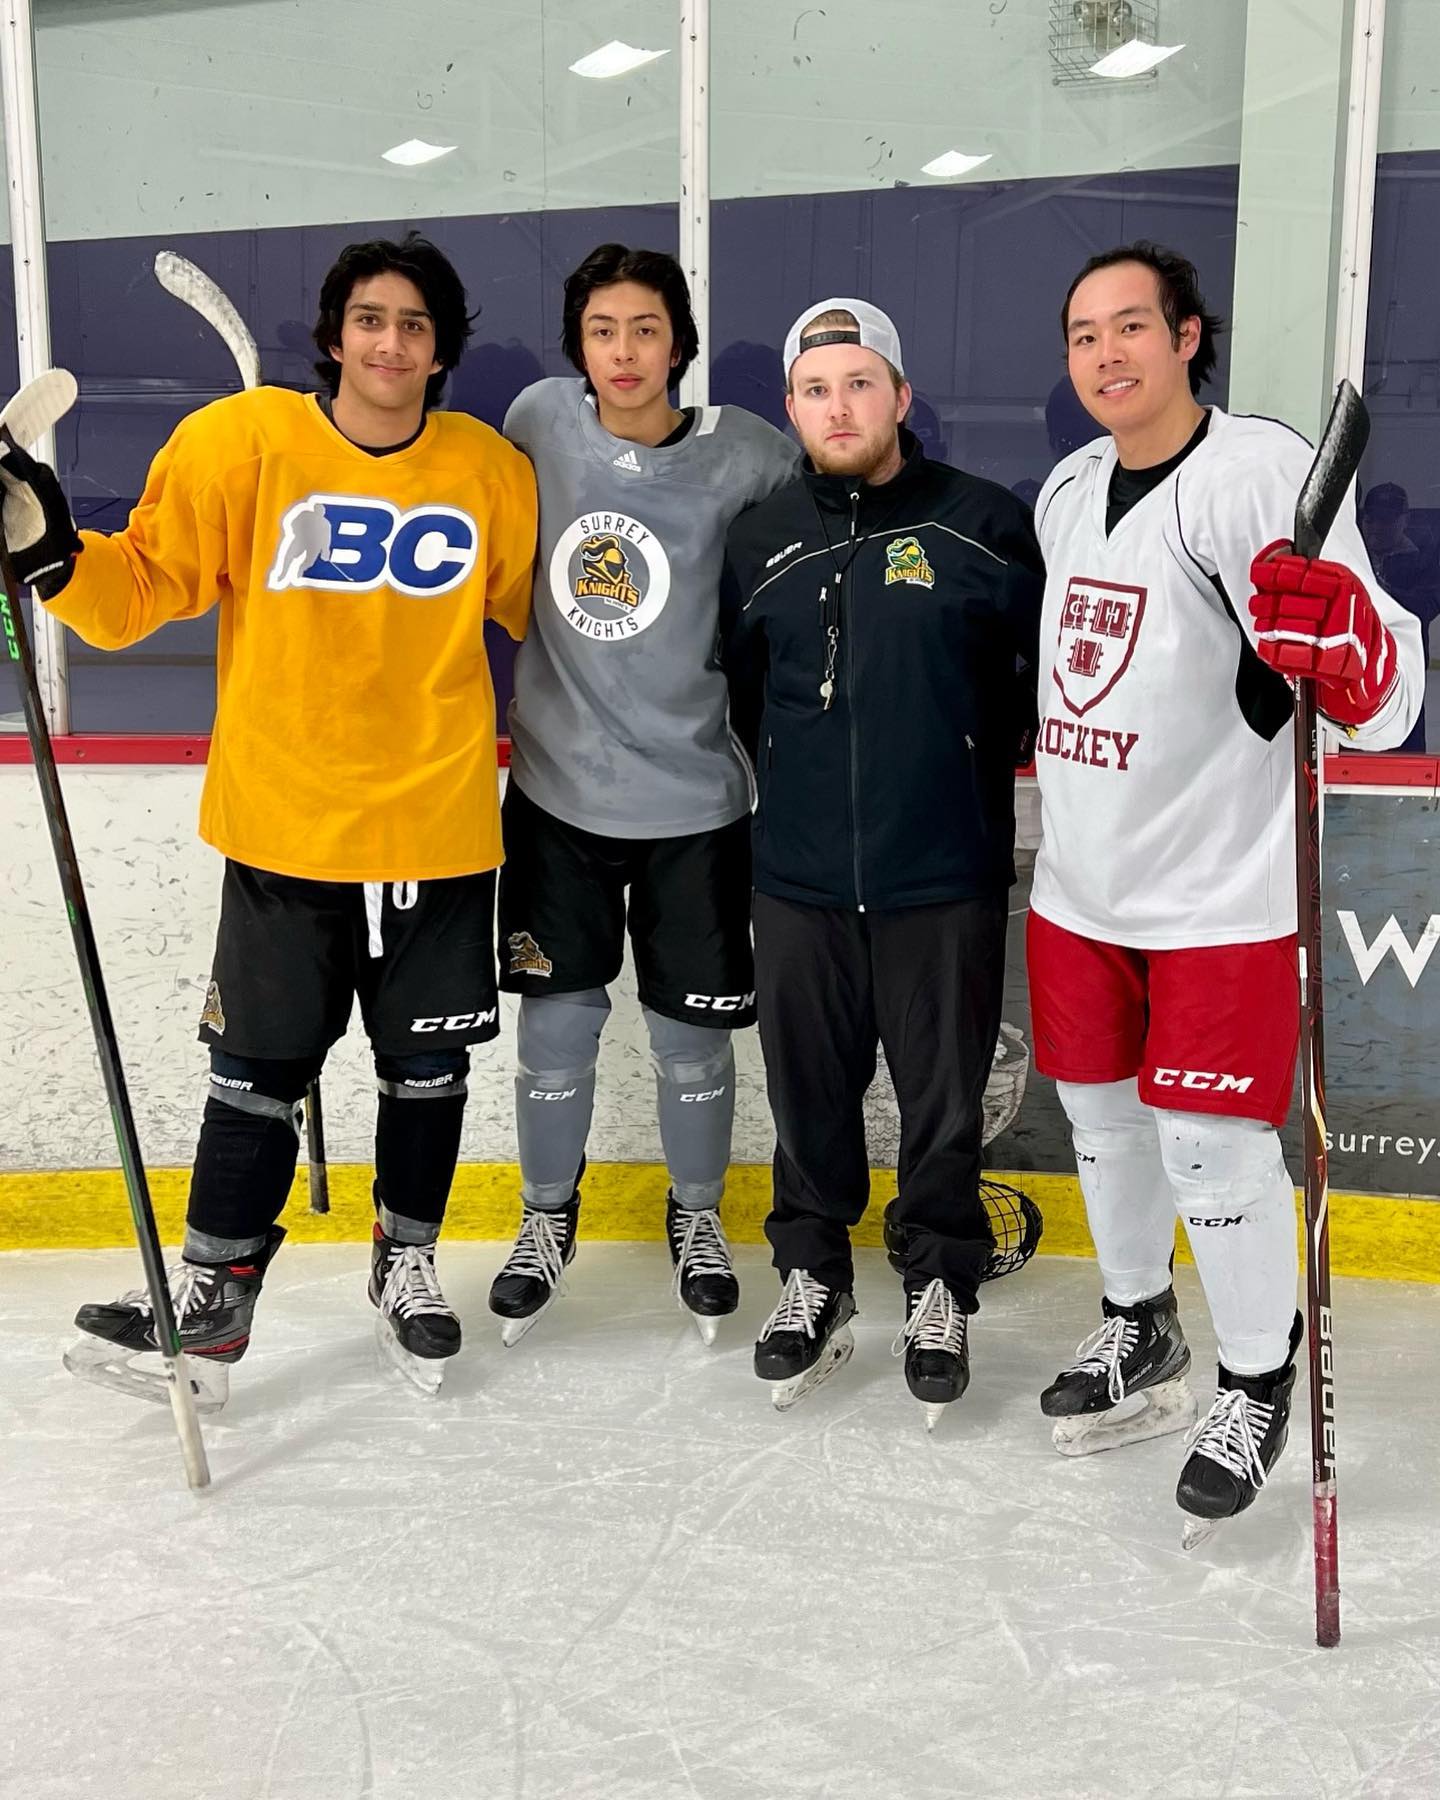 Good to see Chris Seto back from a pro gig in Hungary. Skating with Moledina, Coach Ross and Maddox Caie at a FVSL Pirates practice!